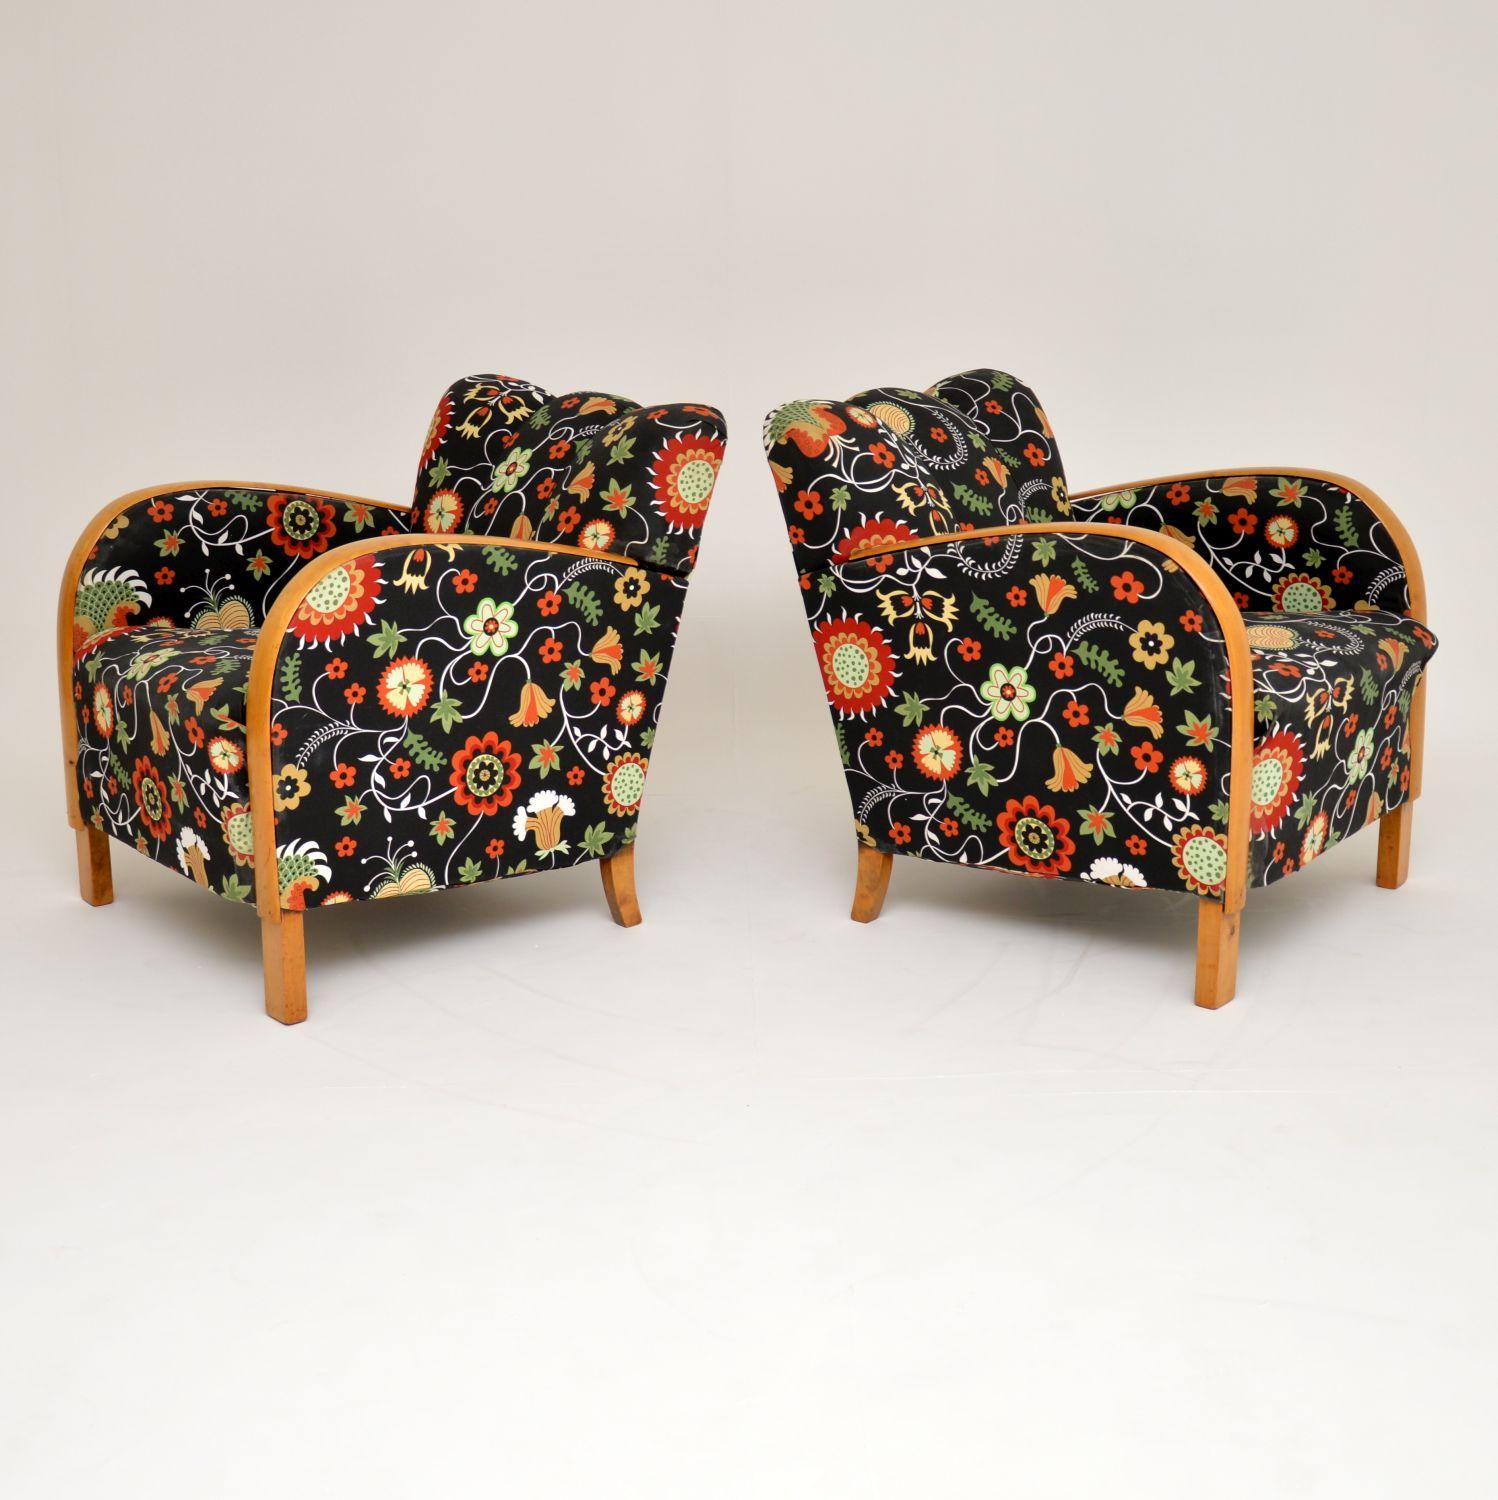 A beautiful pair of original Art Deco period armchairs. They were made in Sweden and they date from the 1920s-3190s. We import similar models regularly and usually re-upholster them in cream. This pair came in a stunning original vintage fabric